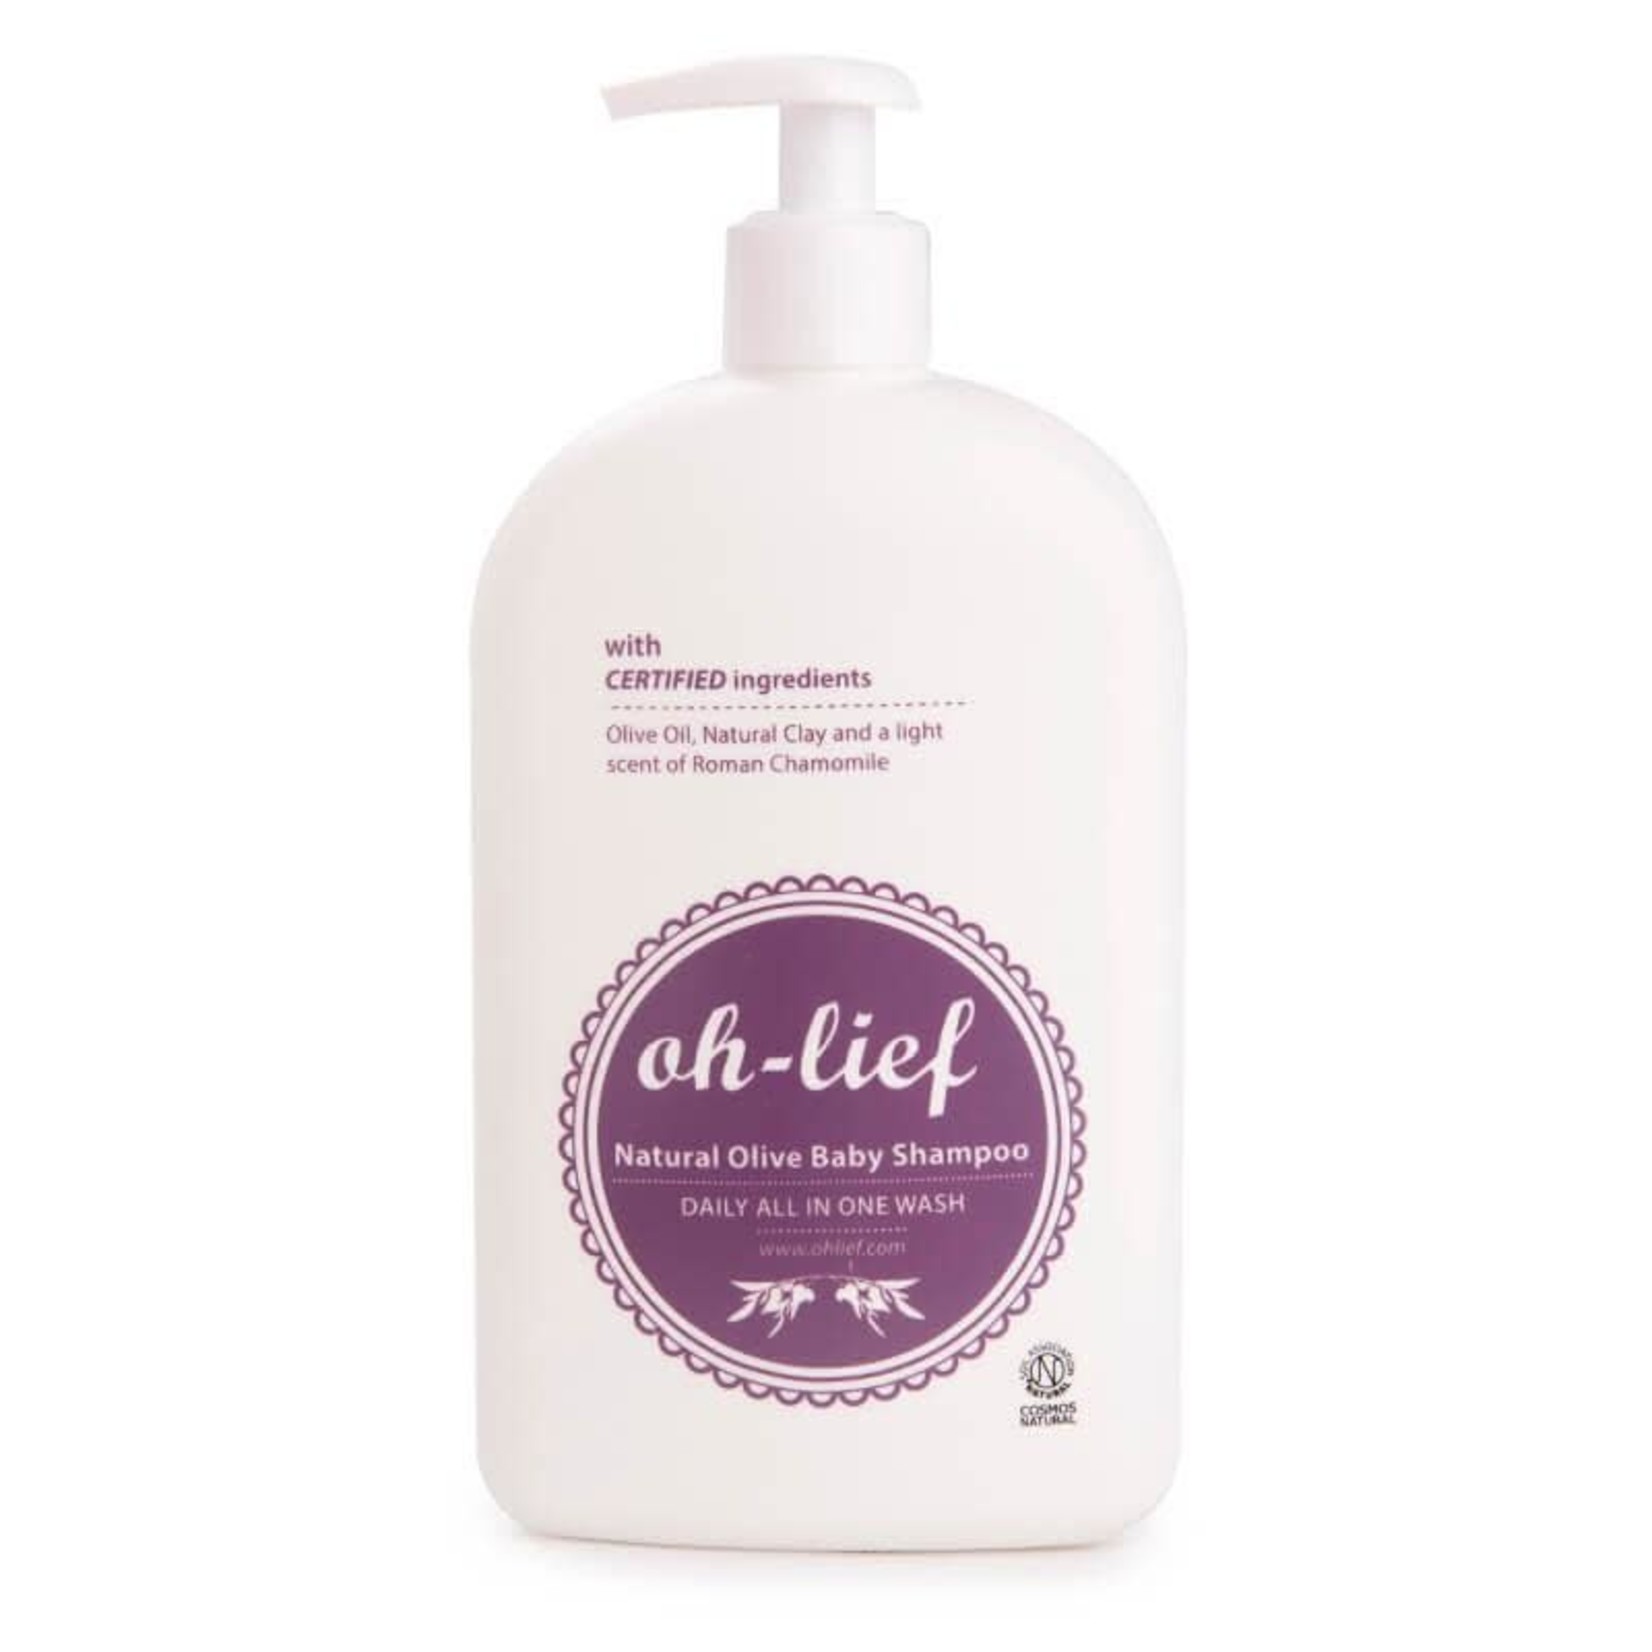 Oh-Lief Natural olive baby shampoo